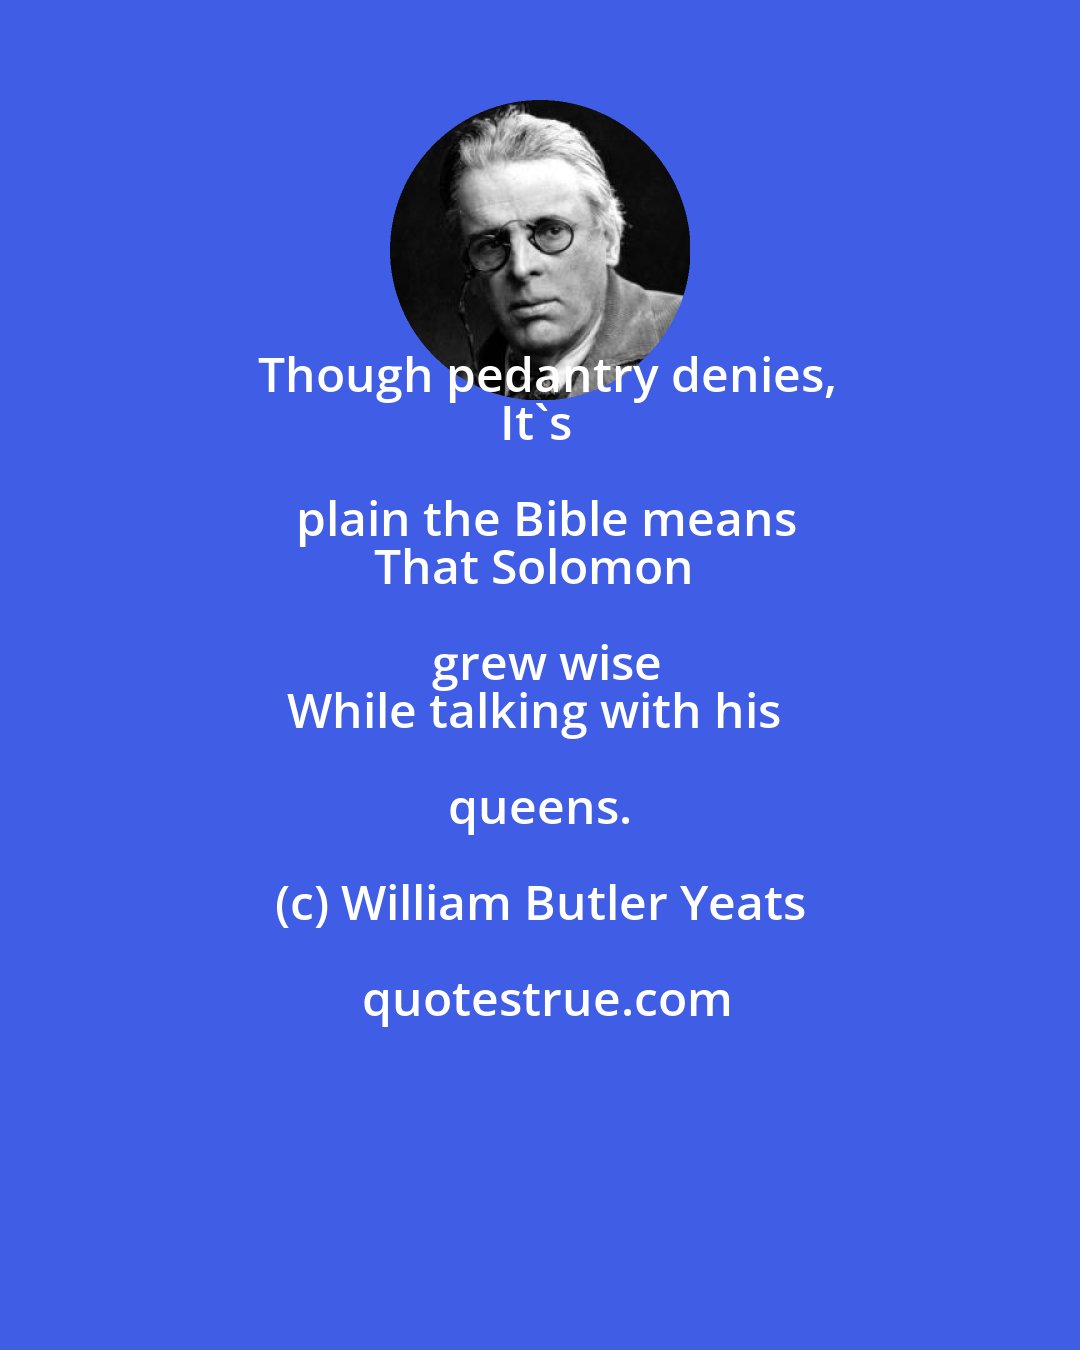 William Butler Yeats: Though pedantry denies,
It's plain the Bible means
That Solomon grew wise
While talking with his queens.